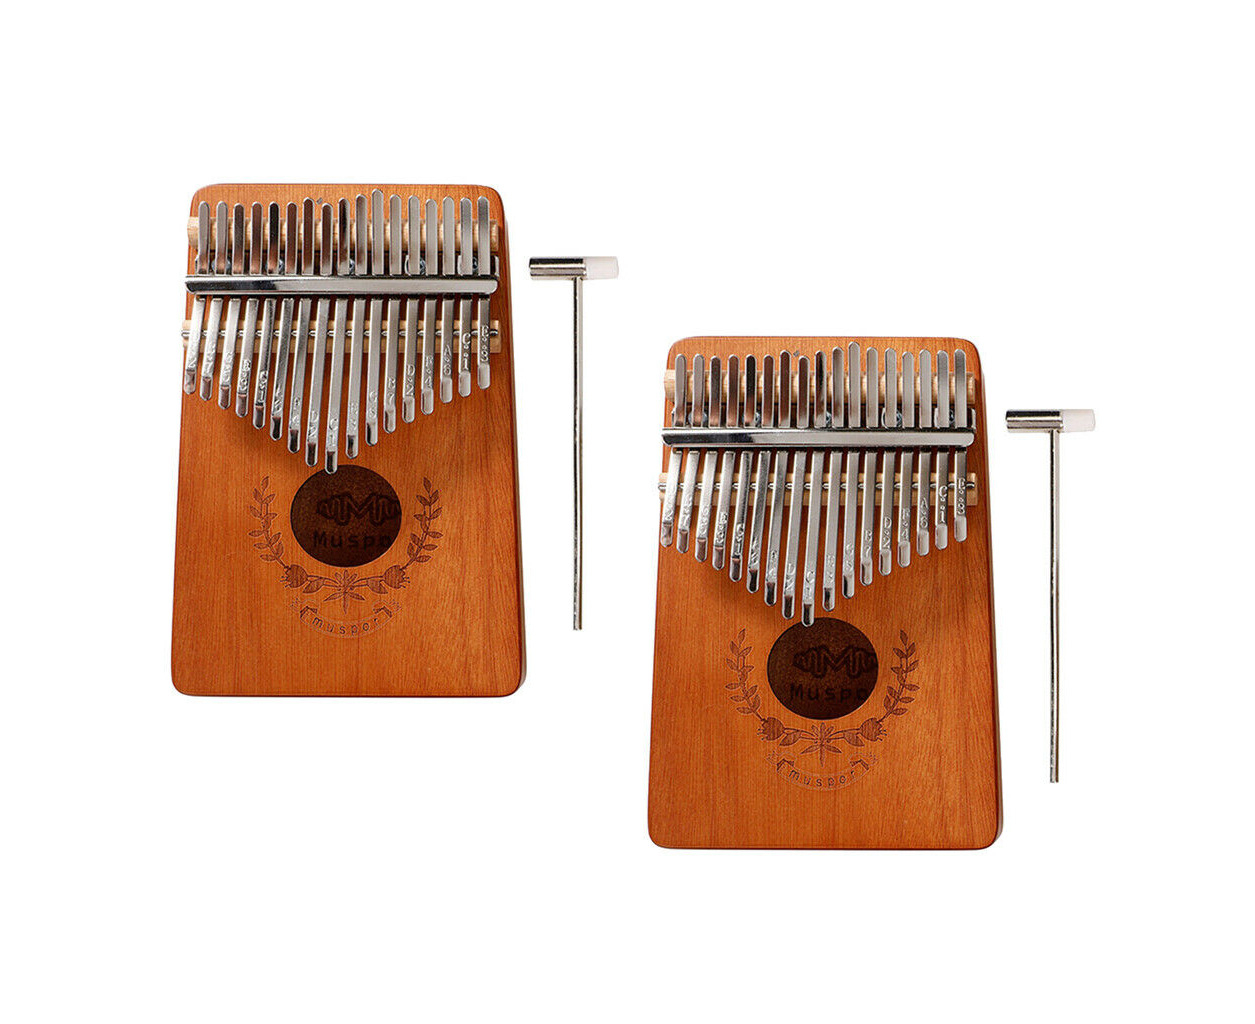 well tuned ideal set for self suitable for beginners and professionals alike children and adults Harmonyx Kalimba 17 keys Thumb Piano Round Hole, Walnut complete kit available in 3 styles 